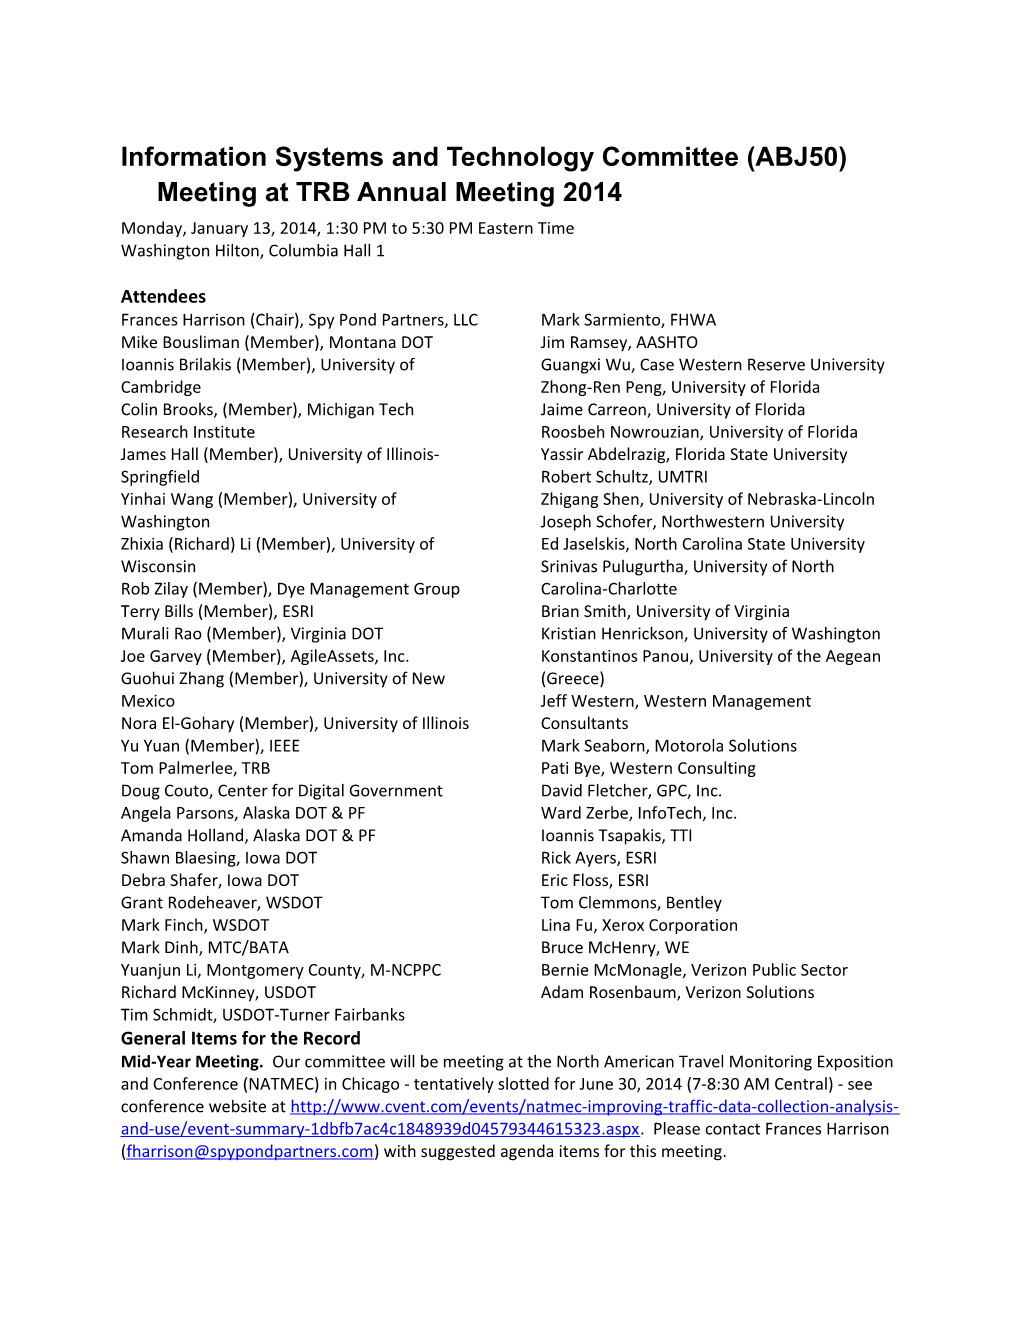 ABJ50 Meeting at TRB Annual Meeting 2012